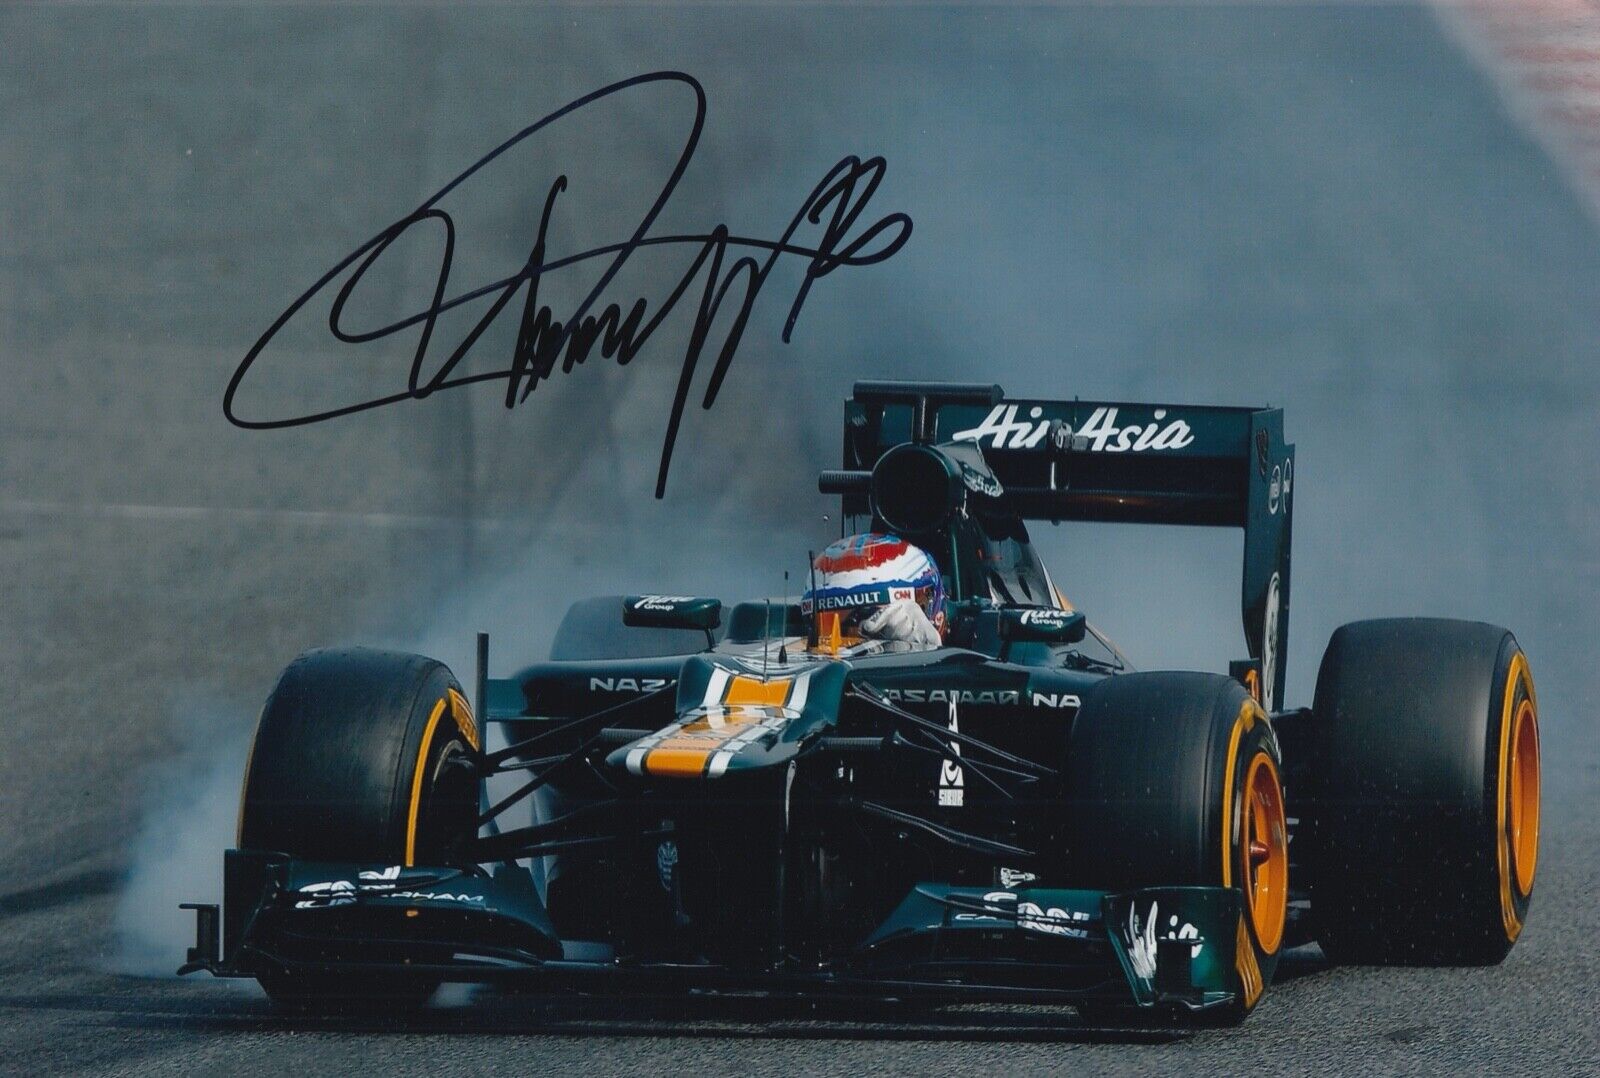 Vitaly Petrov Hand Signed 12x8 Photo Poster painting F1 Autograph Caterham F1 Team 3